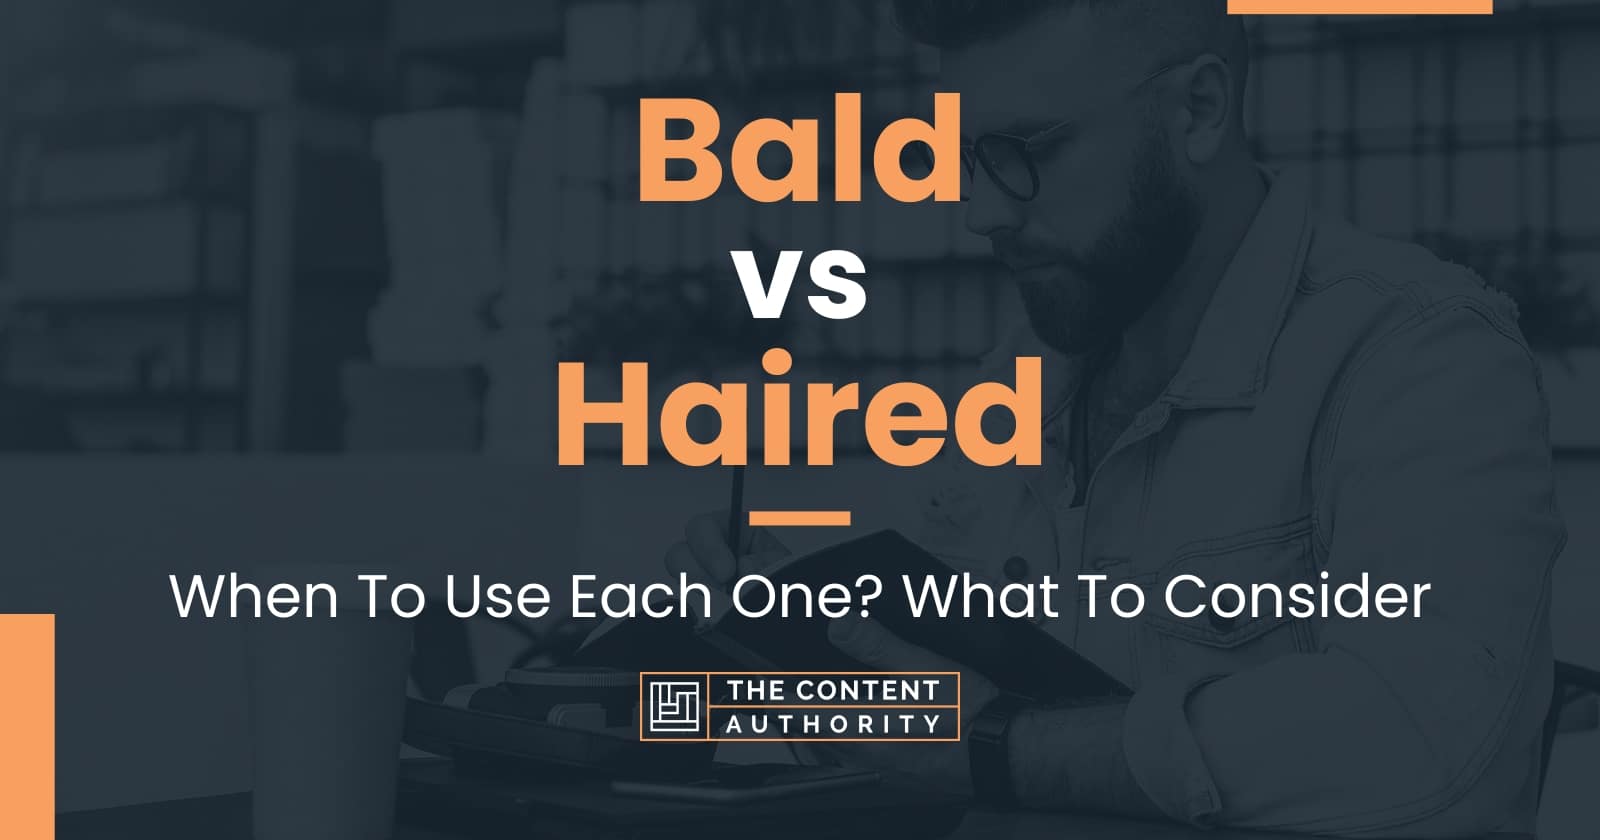 Bald vs Haired: When To Use Each One? What To Consider